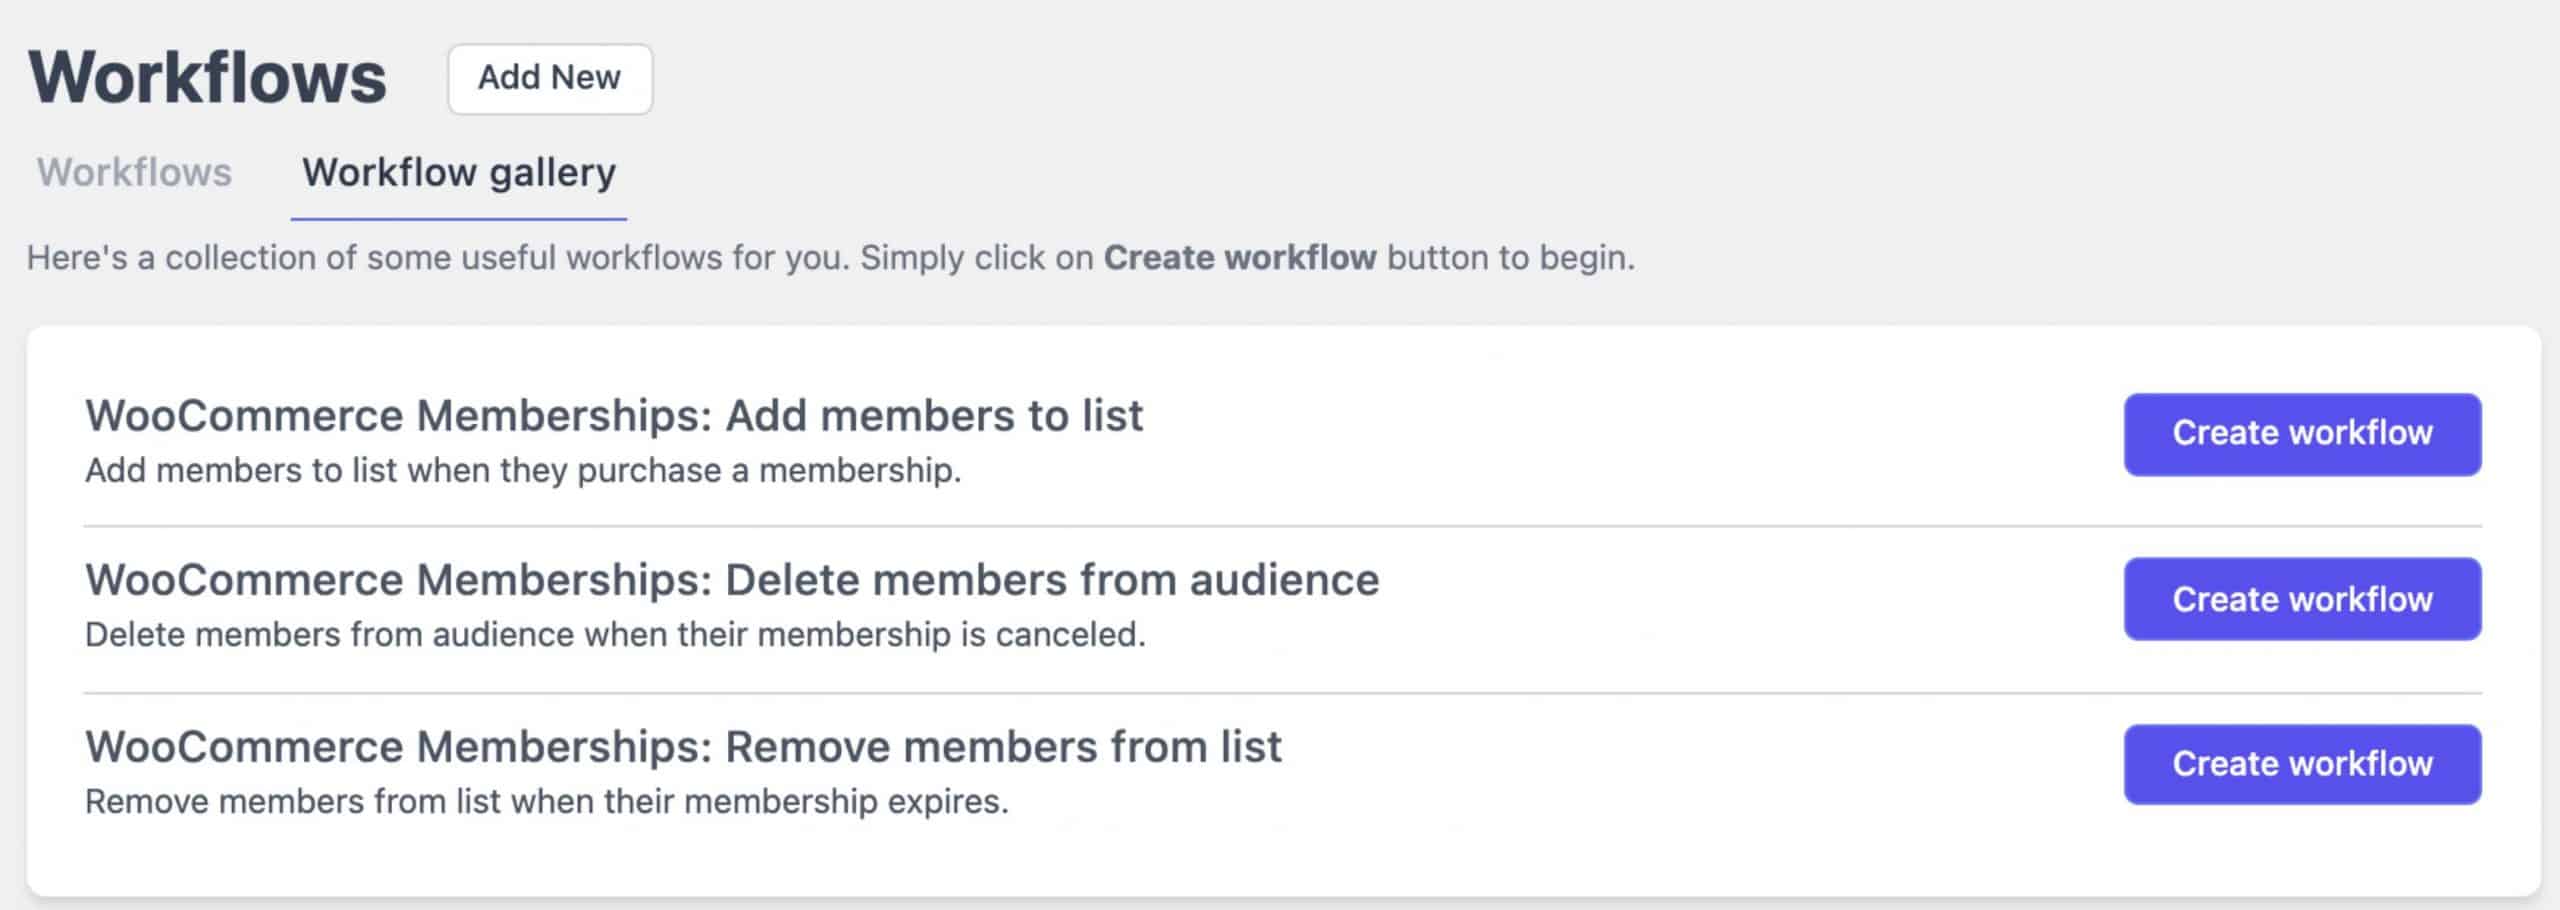 Icegram Express and WooCommerce Memberships Workflows